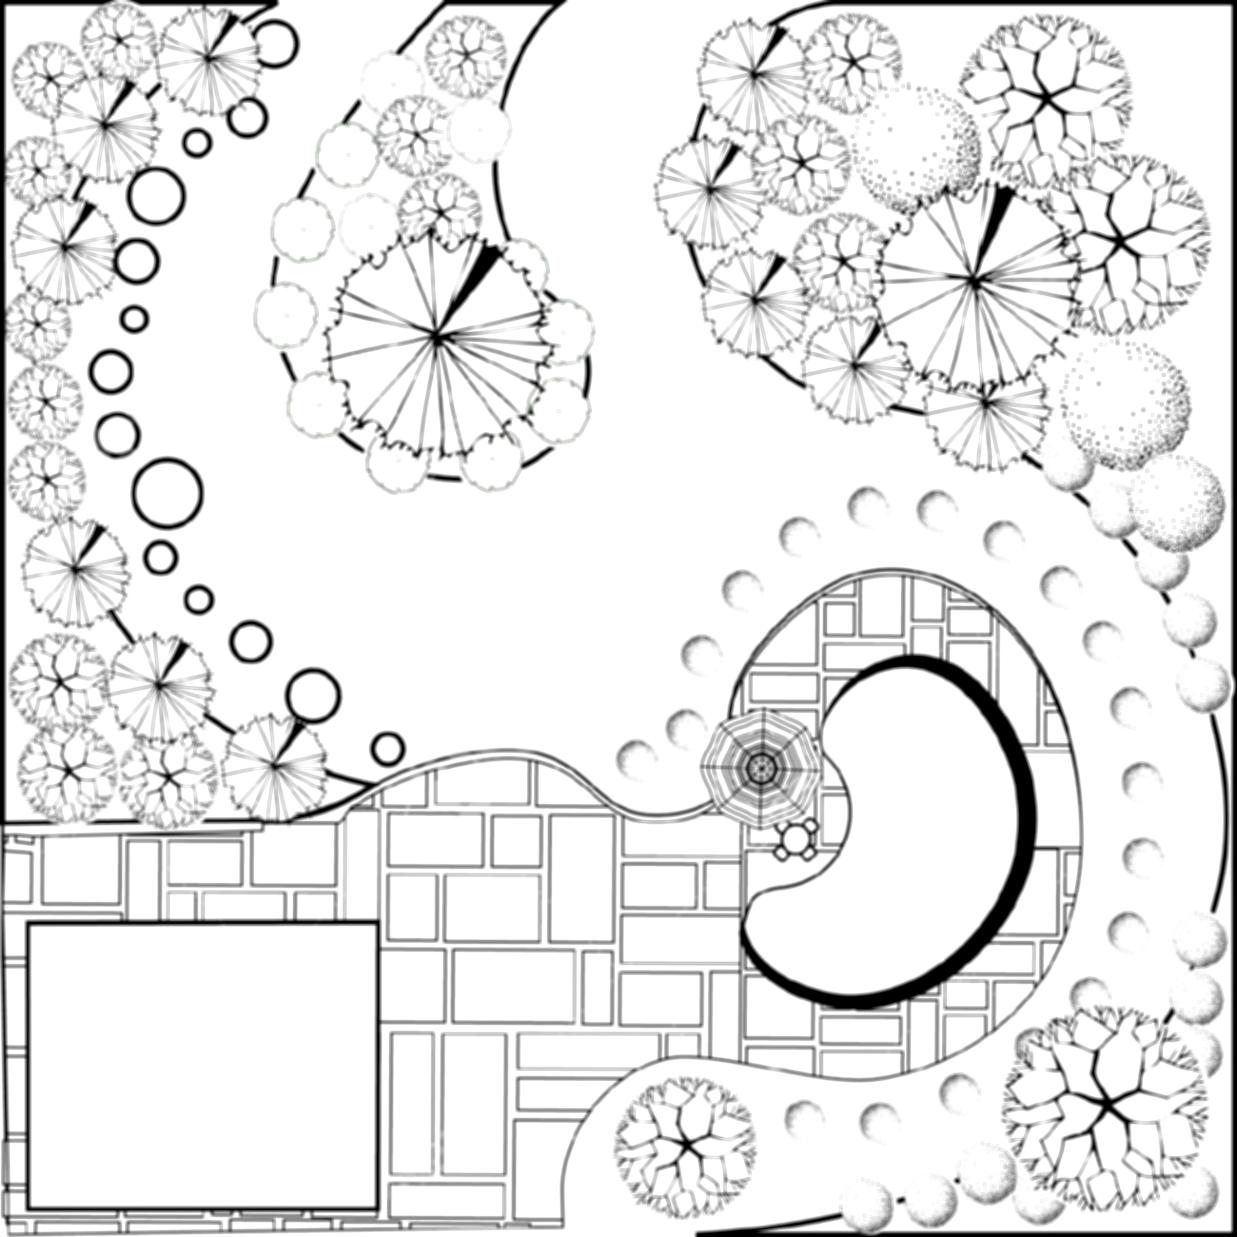 Plan Of Garden Black And White Royalty Free Clipart Vectors